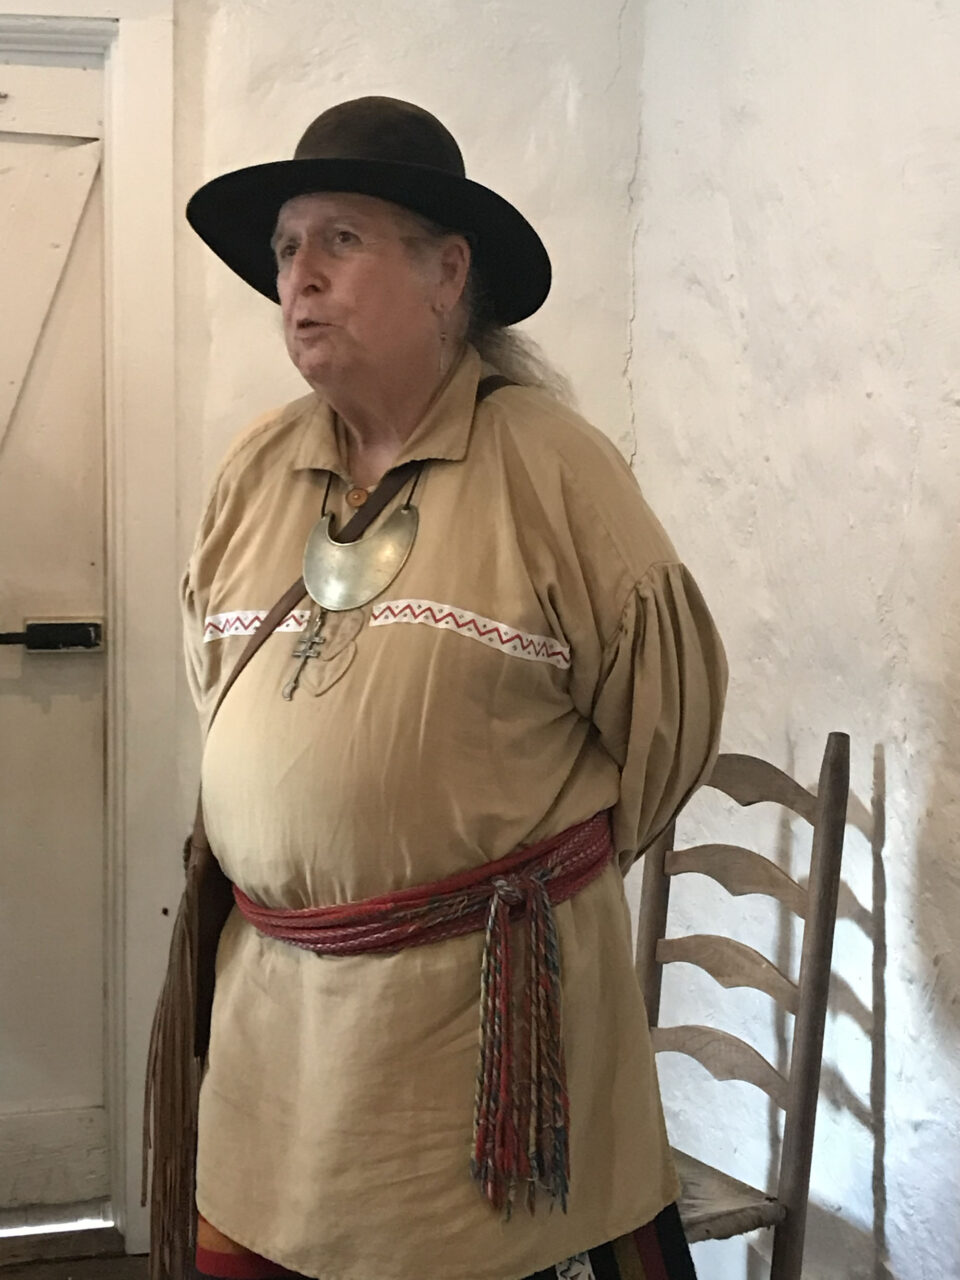 Chief of the local tribe, Houma, is also a storyteller at Vermillionville.